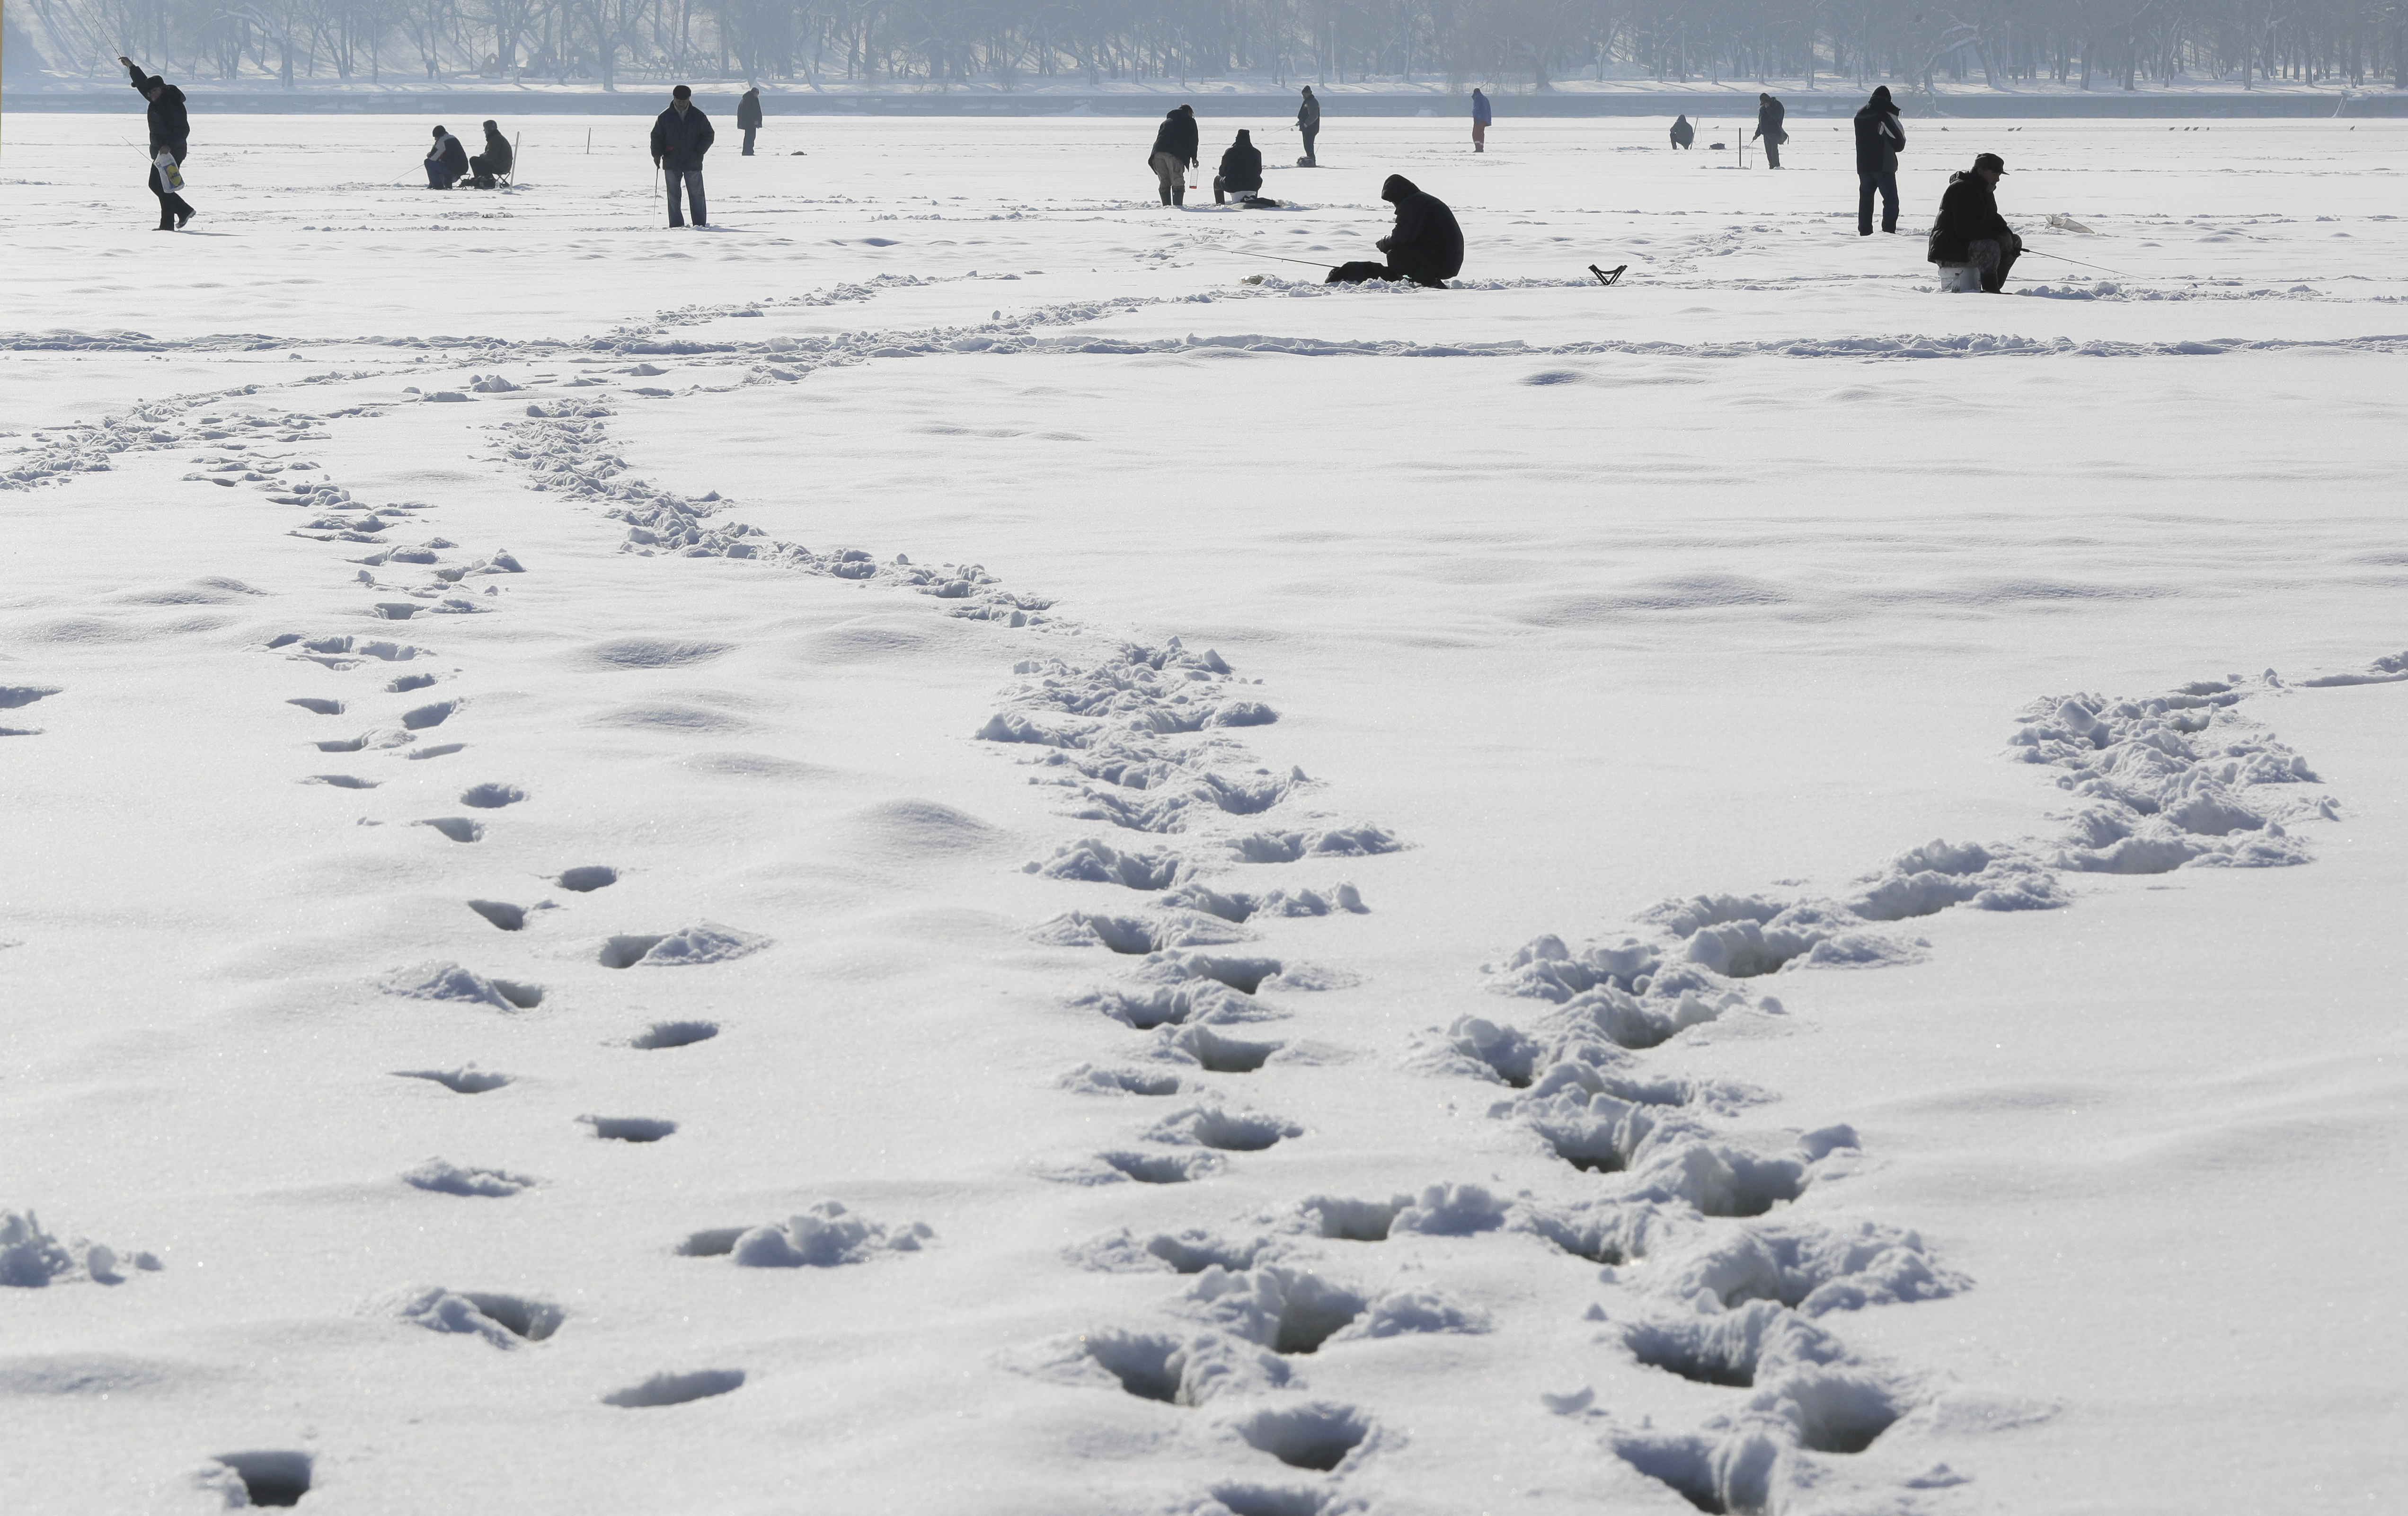 People fish on a frozen lake on the outskirts of Bucharest, Romania, Friday, Jan. 13, 2017. The Romanian capital experienced milder weather after a week of blizzards and extreme cold that caused a major disruption of the road and railway transport.(AP Photo/Vadim Ghirda)